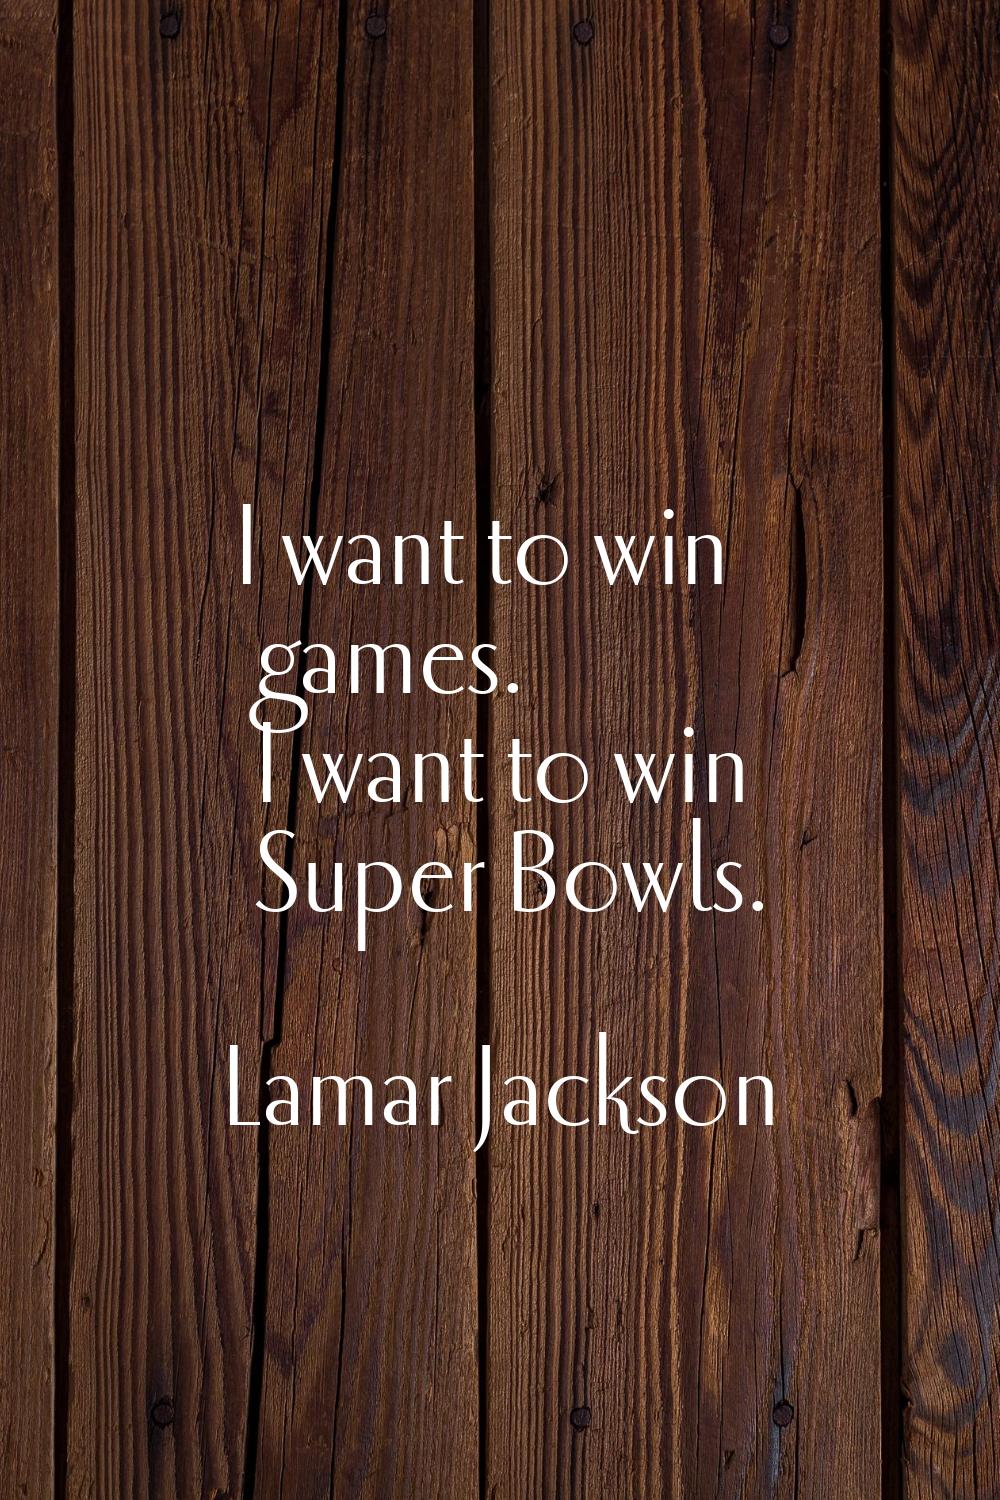 I want to win games. I want to win Super Bowls.